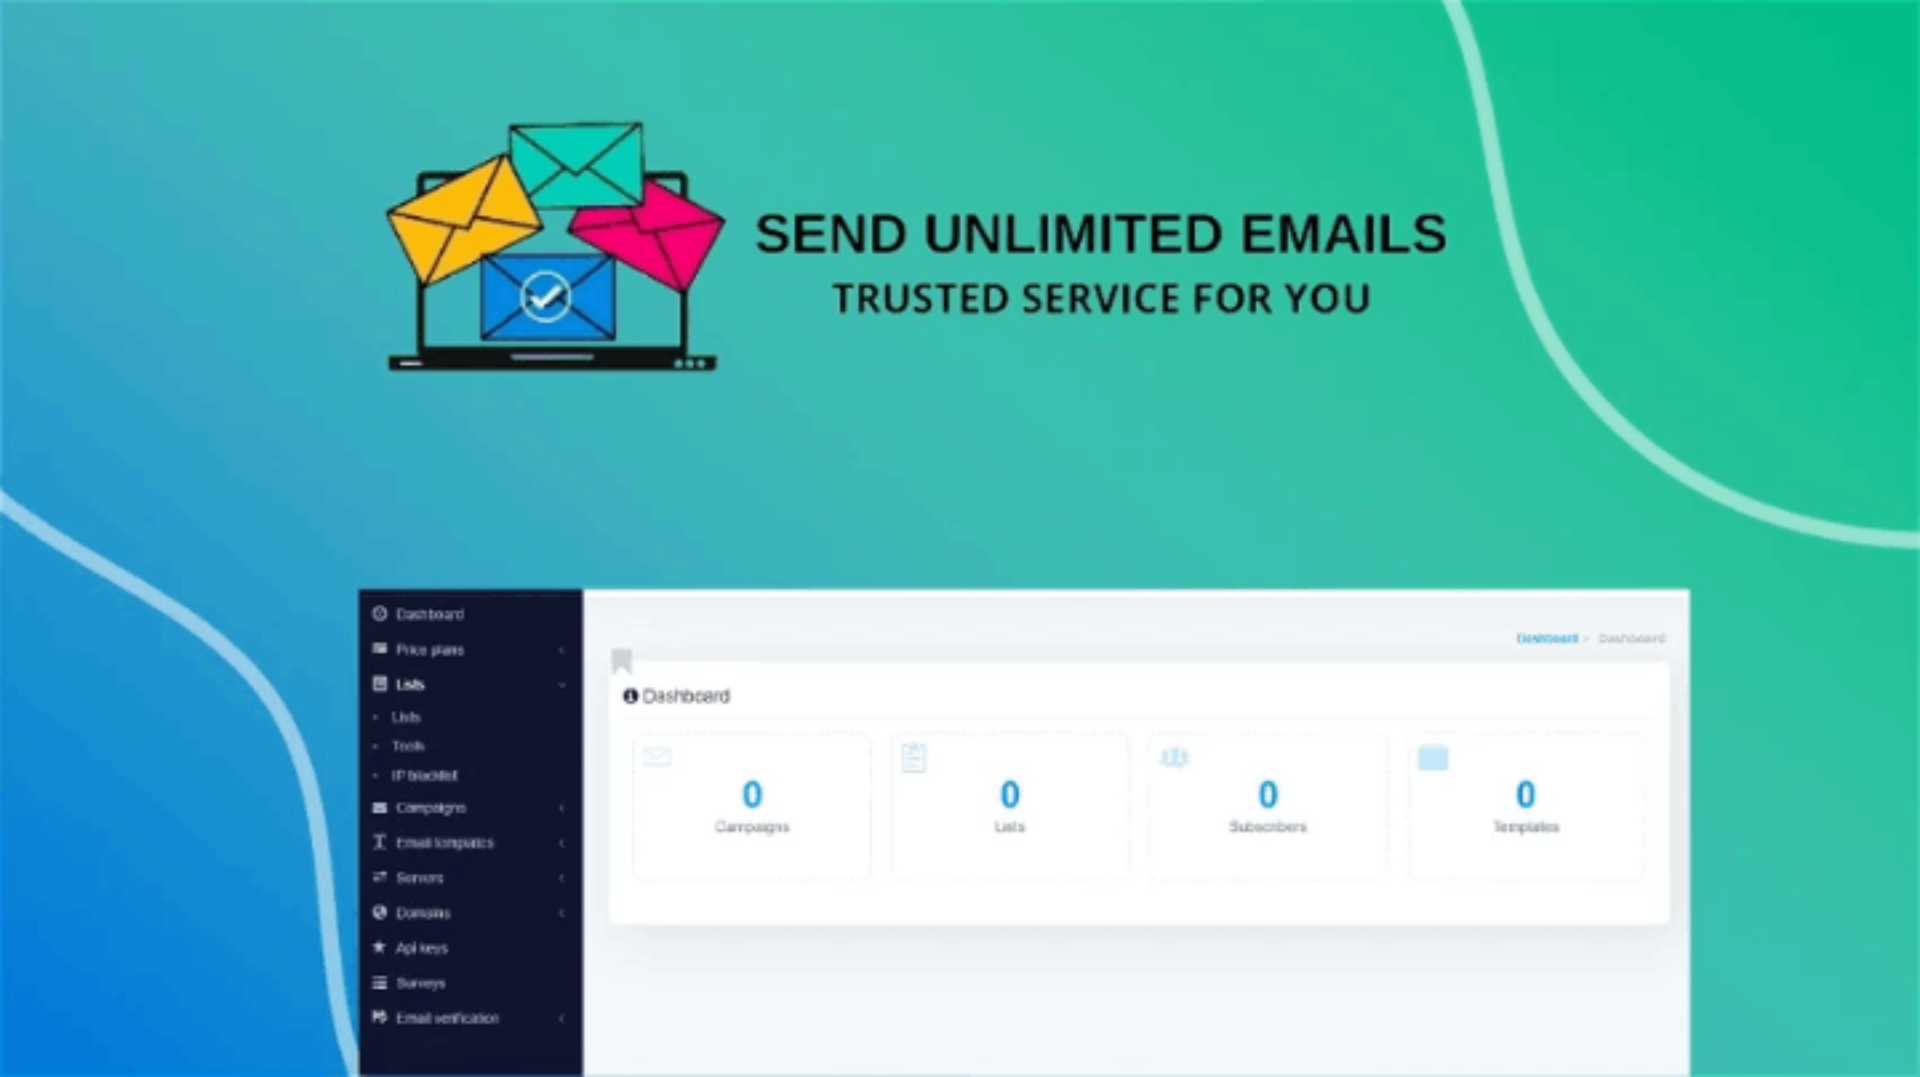 Lifetime Deal to Send Unlimited Email: Premium Plan for $399